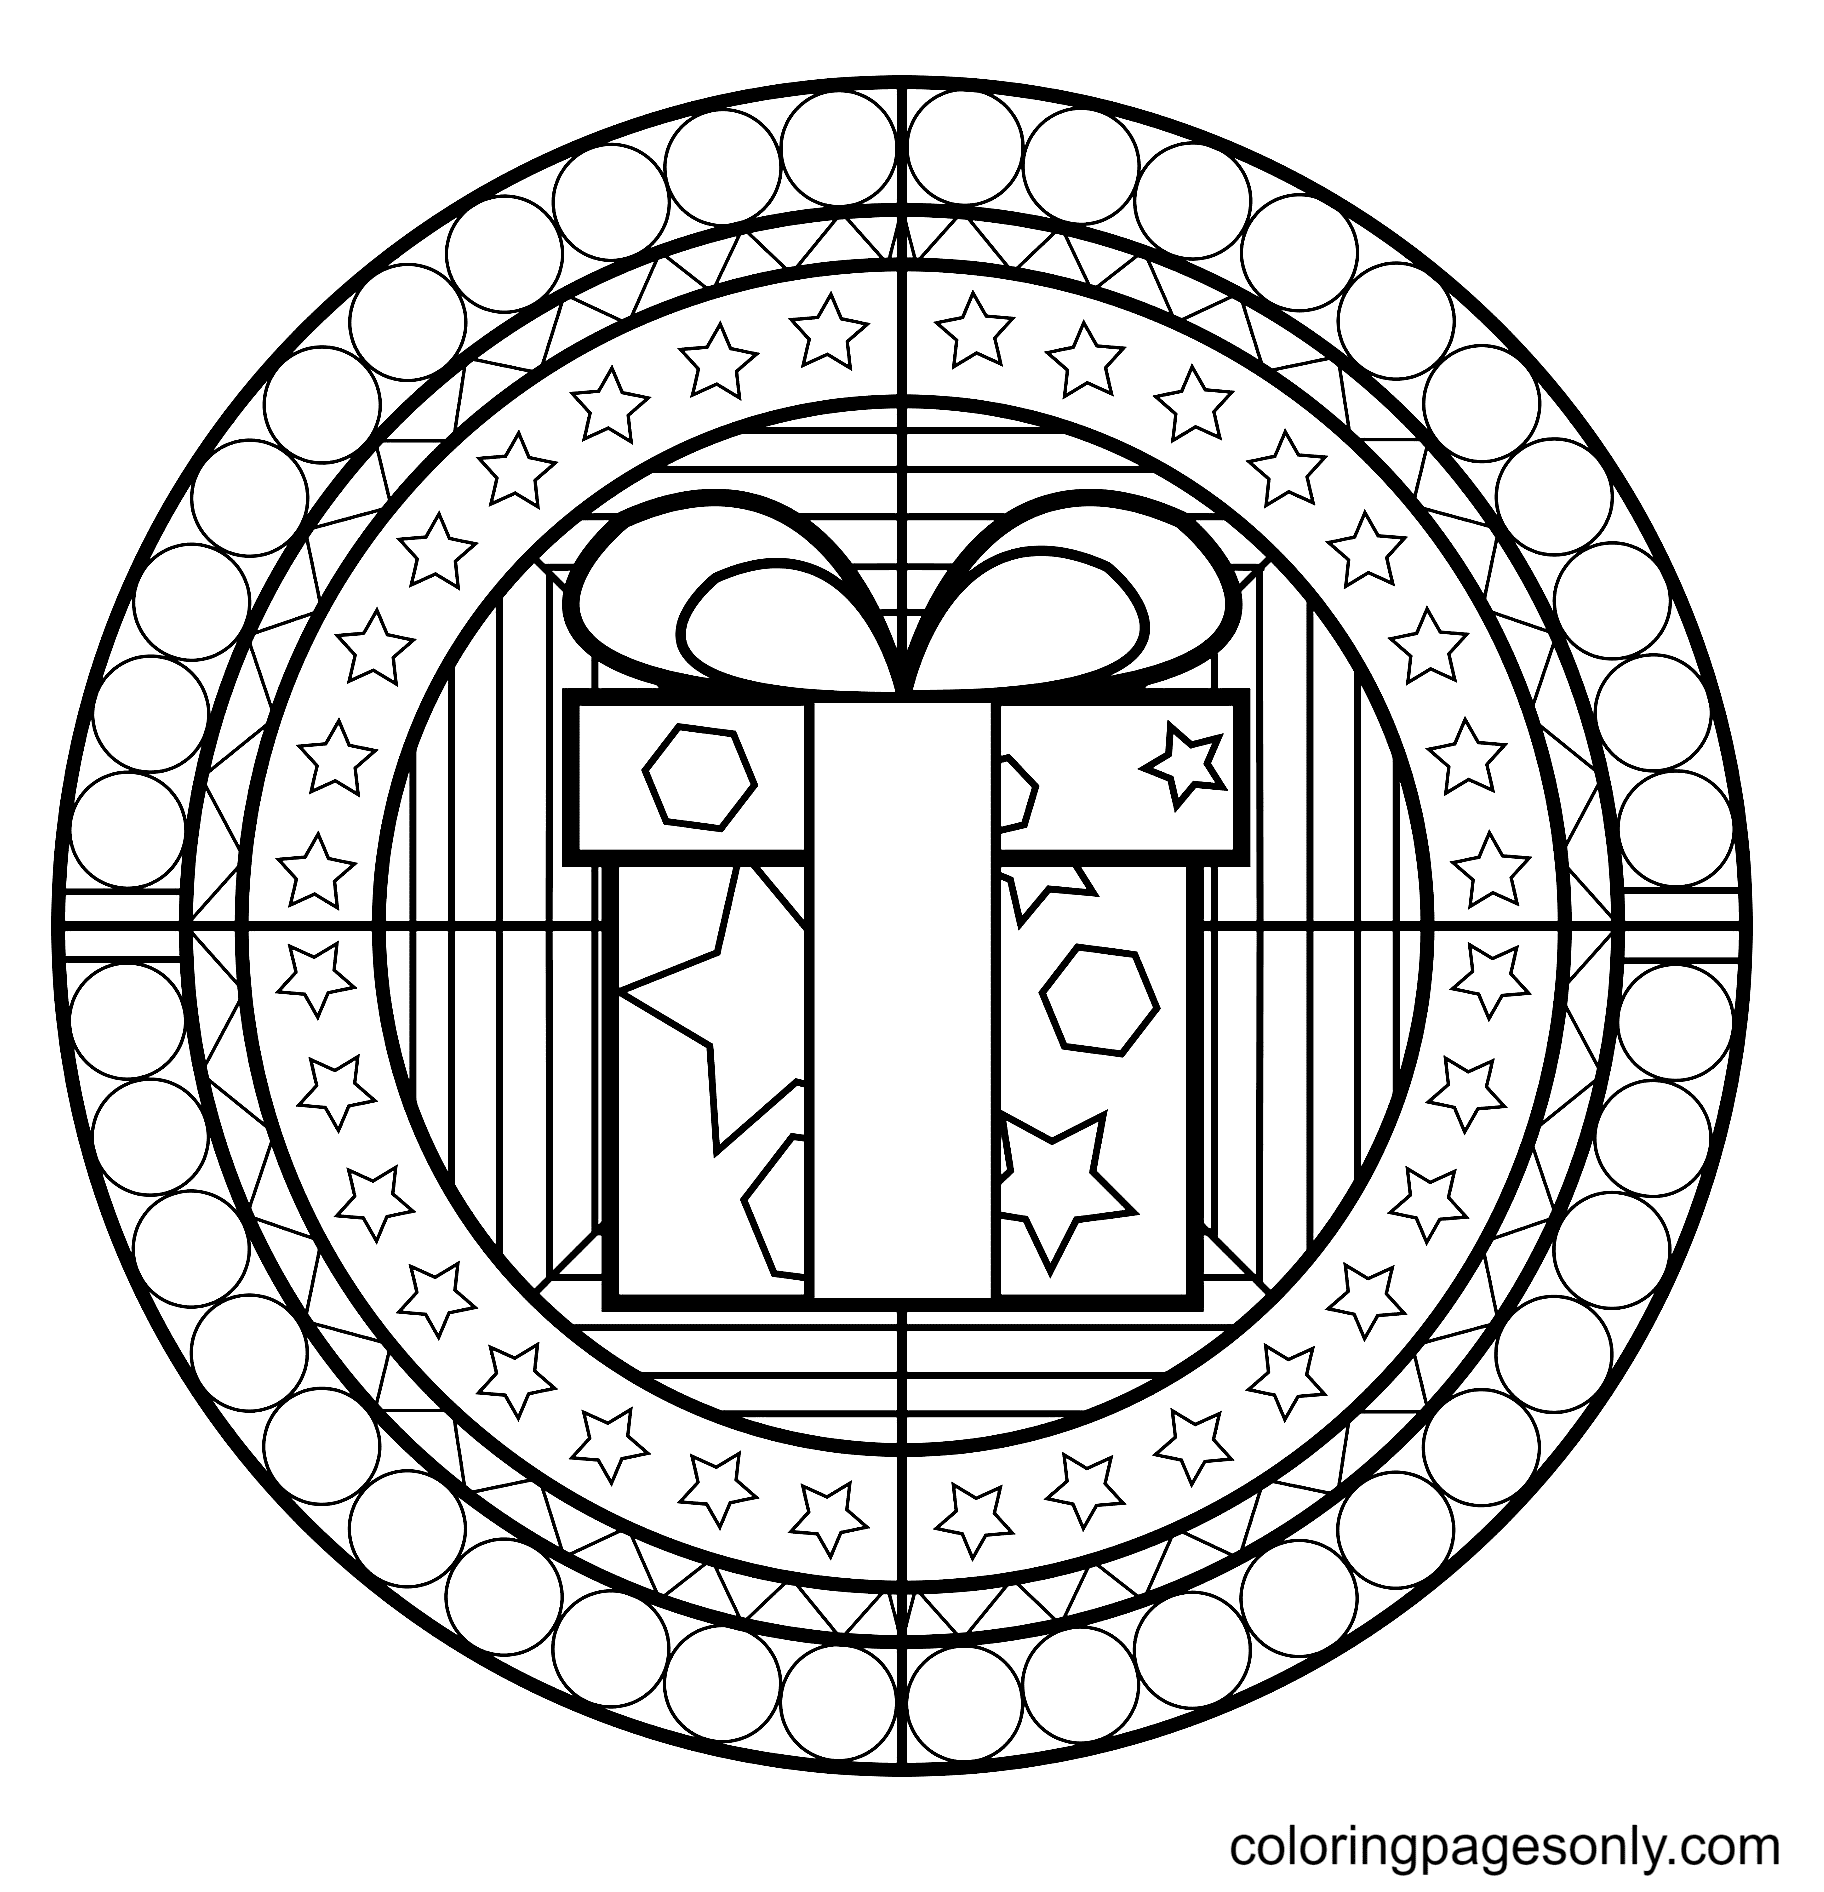 Gift for Christmas Mandala Coloring Pages